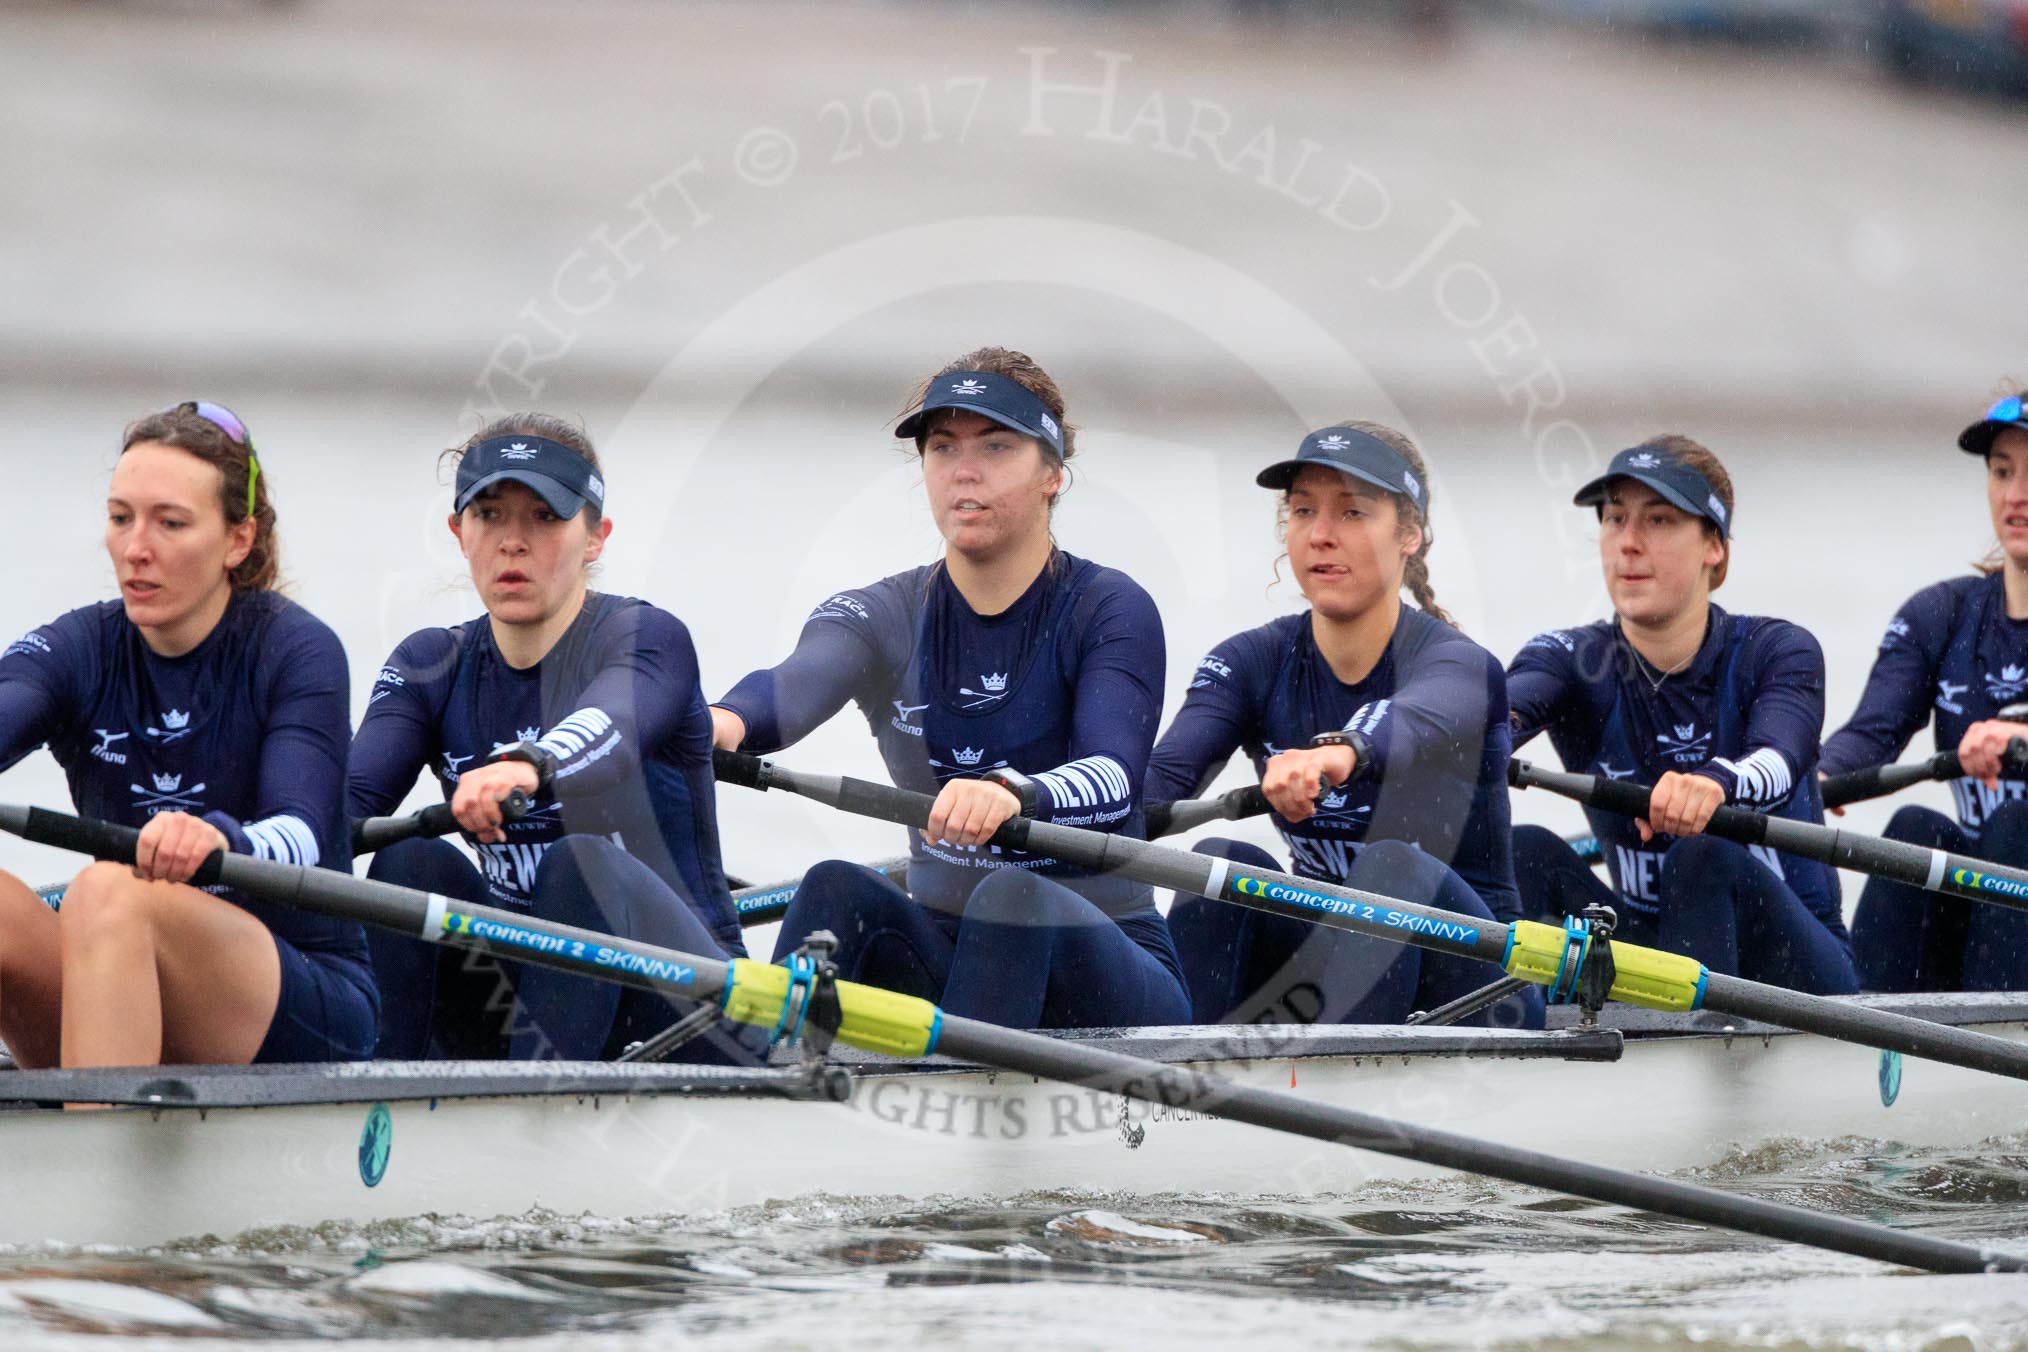 The Boat Race season 2018 - Women's Boat Race Trial Eights (OUWBC, Oxford): "Great Typhoon" seconds after the race has been started - 7 Abigail Killen, 6 Sara Kushma, 5 Olivia Pryer, 4 Linda Van Bijsterveldt, 3 Madeline Goss, 2 Laura Depner.
River Thames between Putney Bridge and Mortlake,
London SW15,

United Kingdom,
on 21 January 2018 at 14:28, image #57